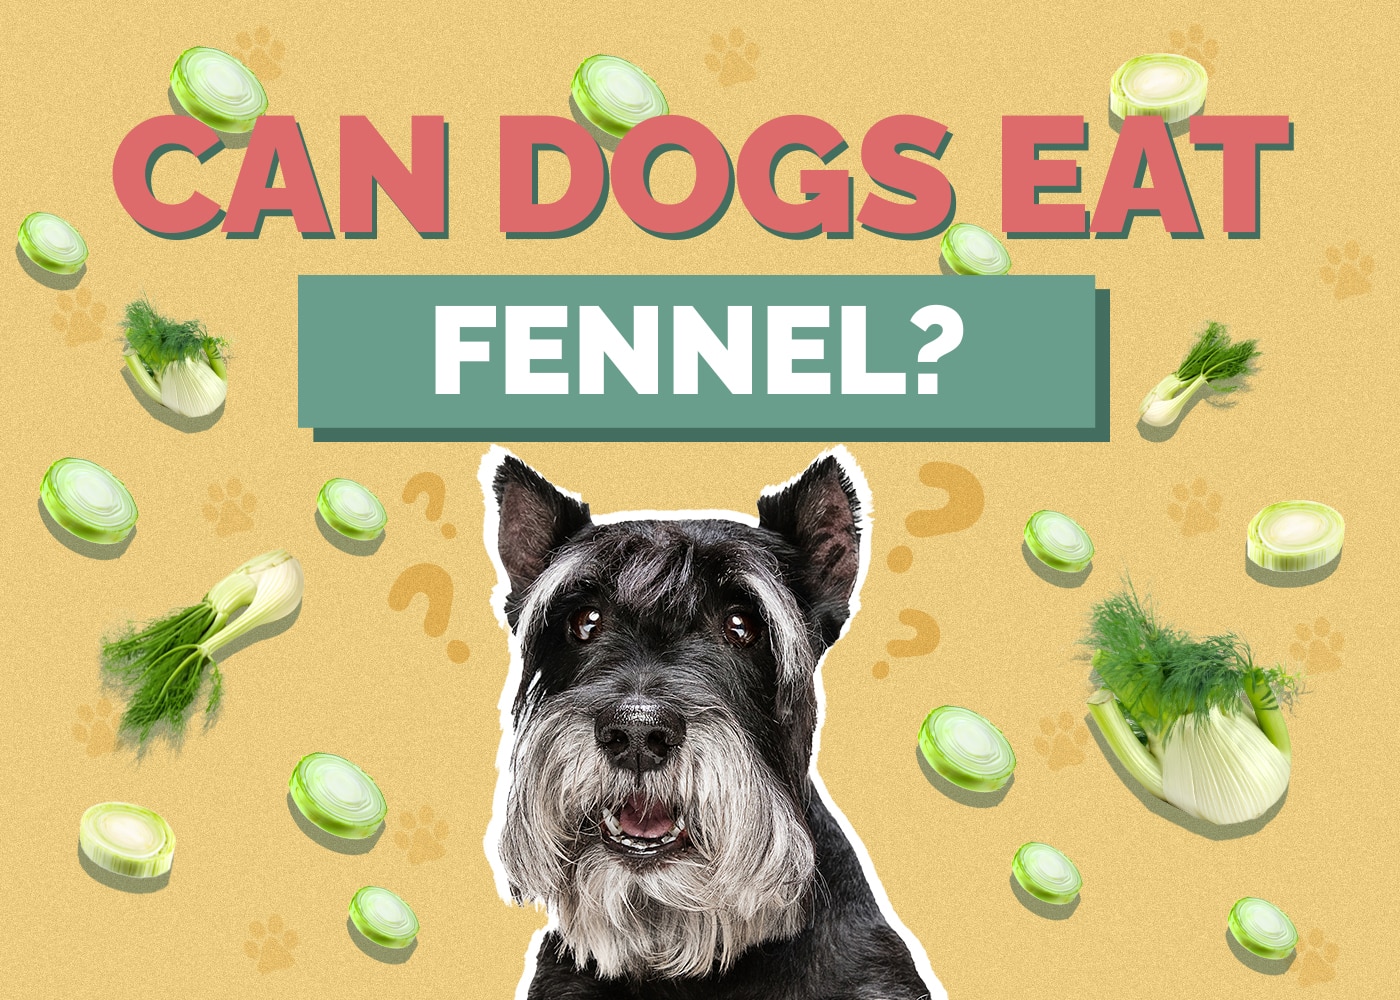 Can Dogs Eat fennel